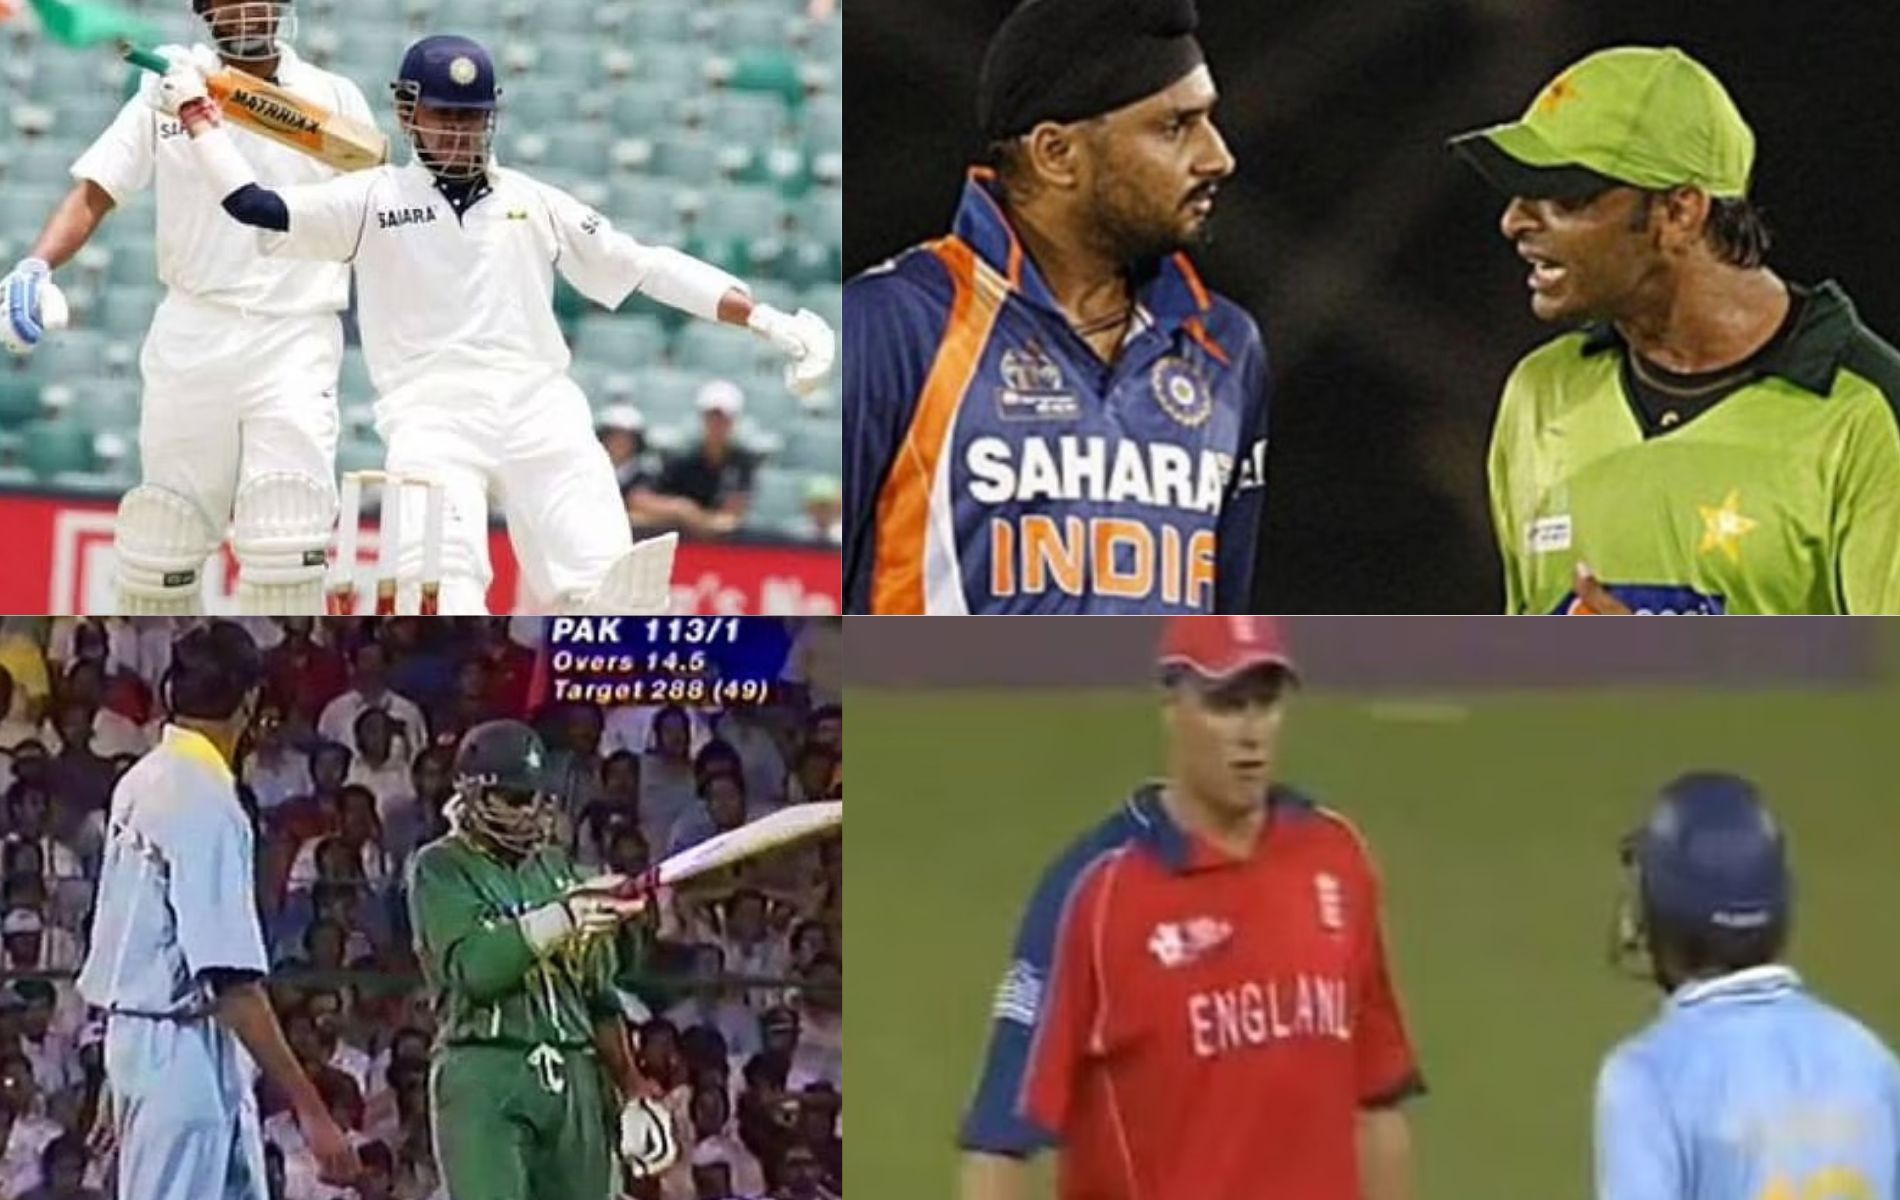 Indian cricketers have come out on top in quite a few sledging tussles.